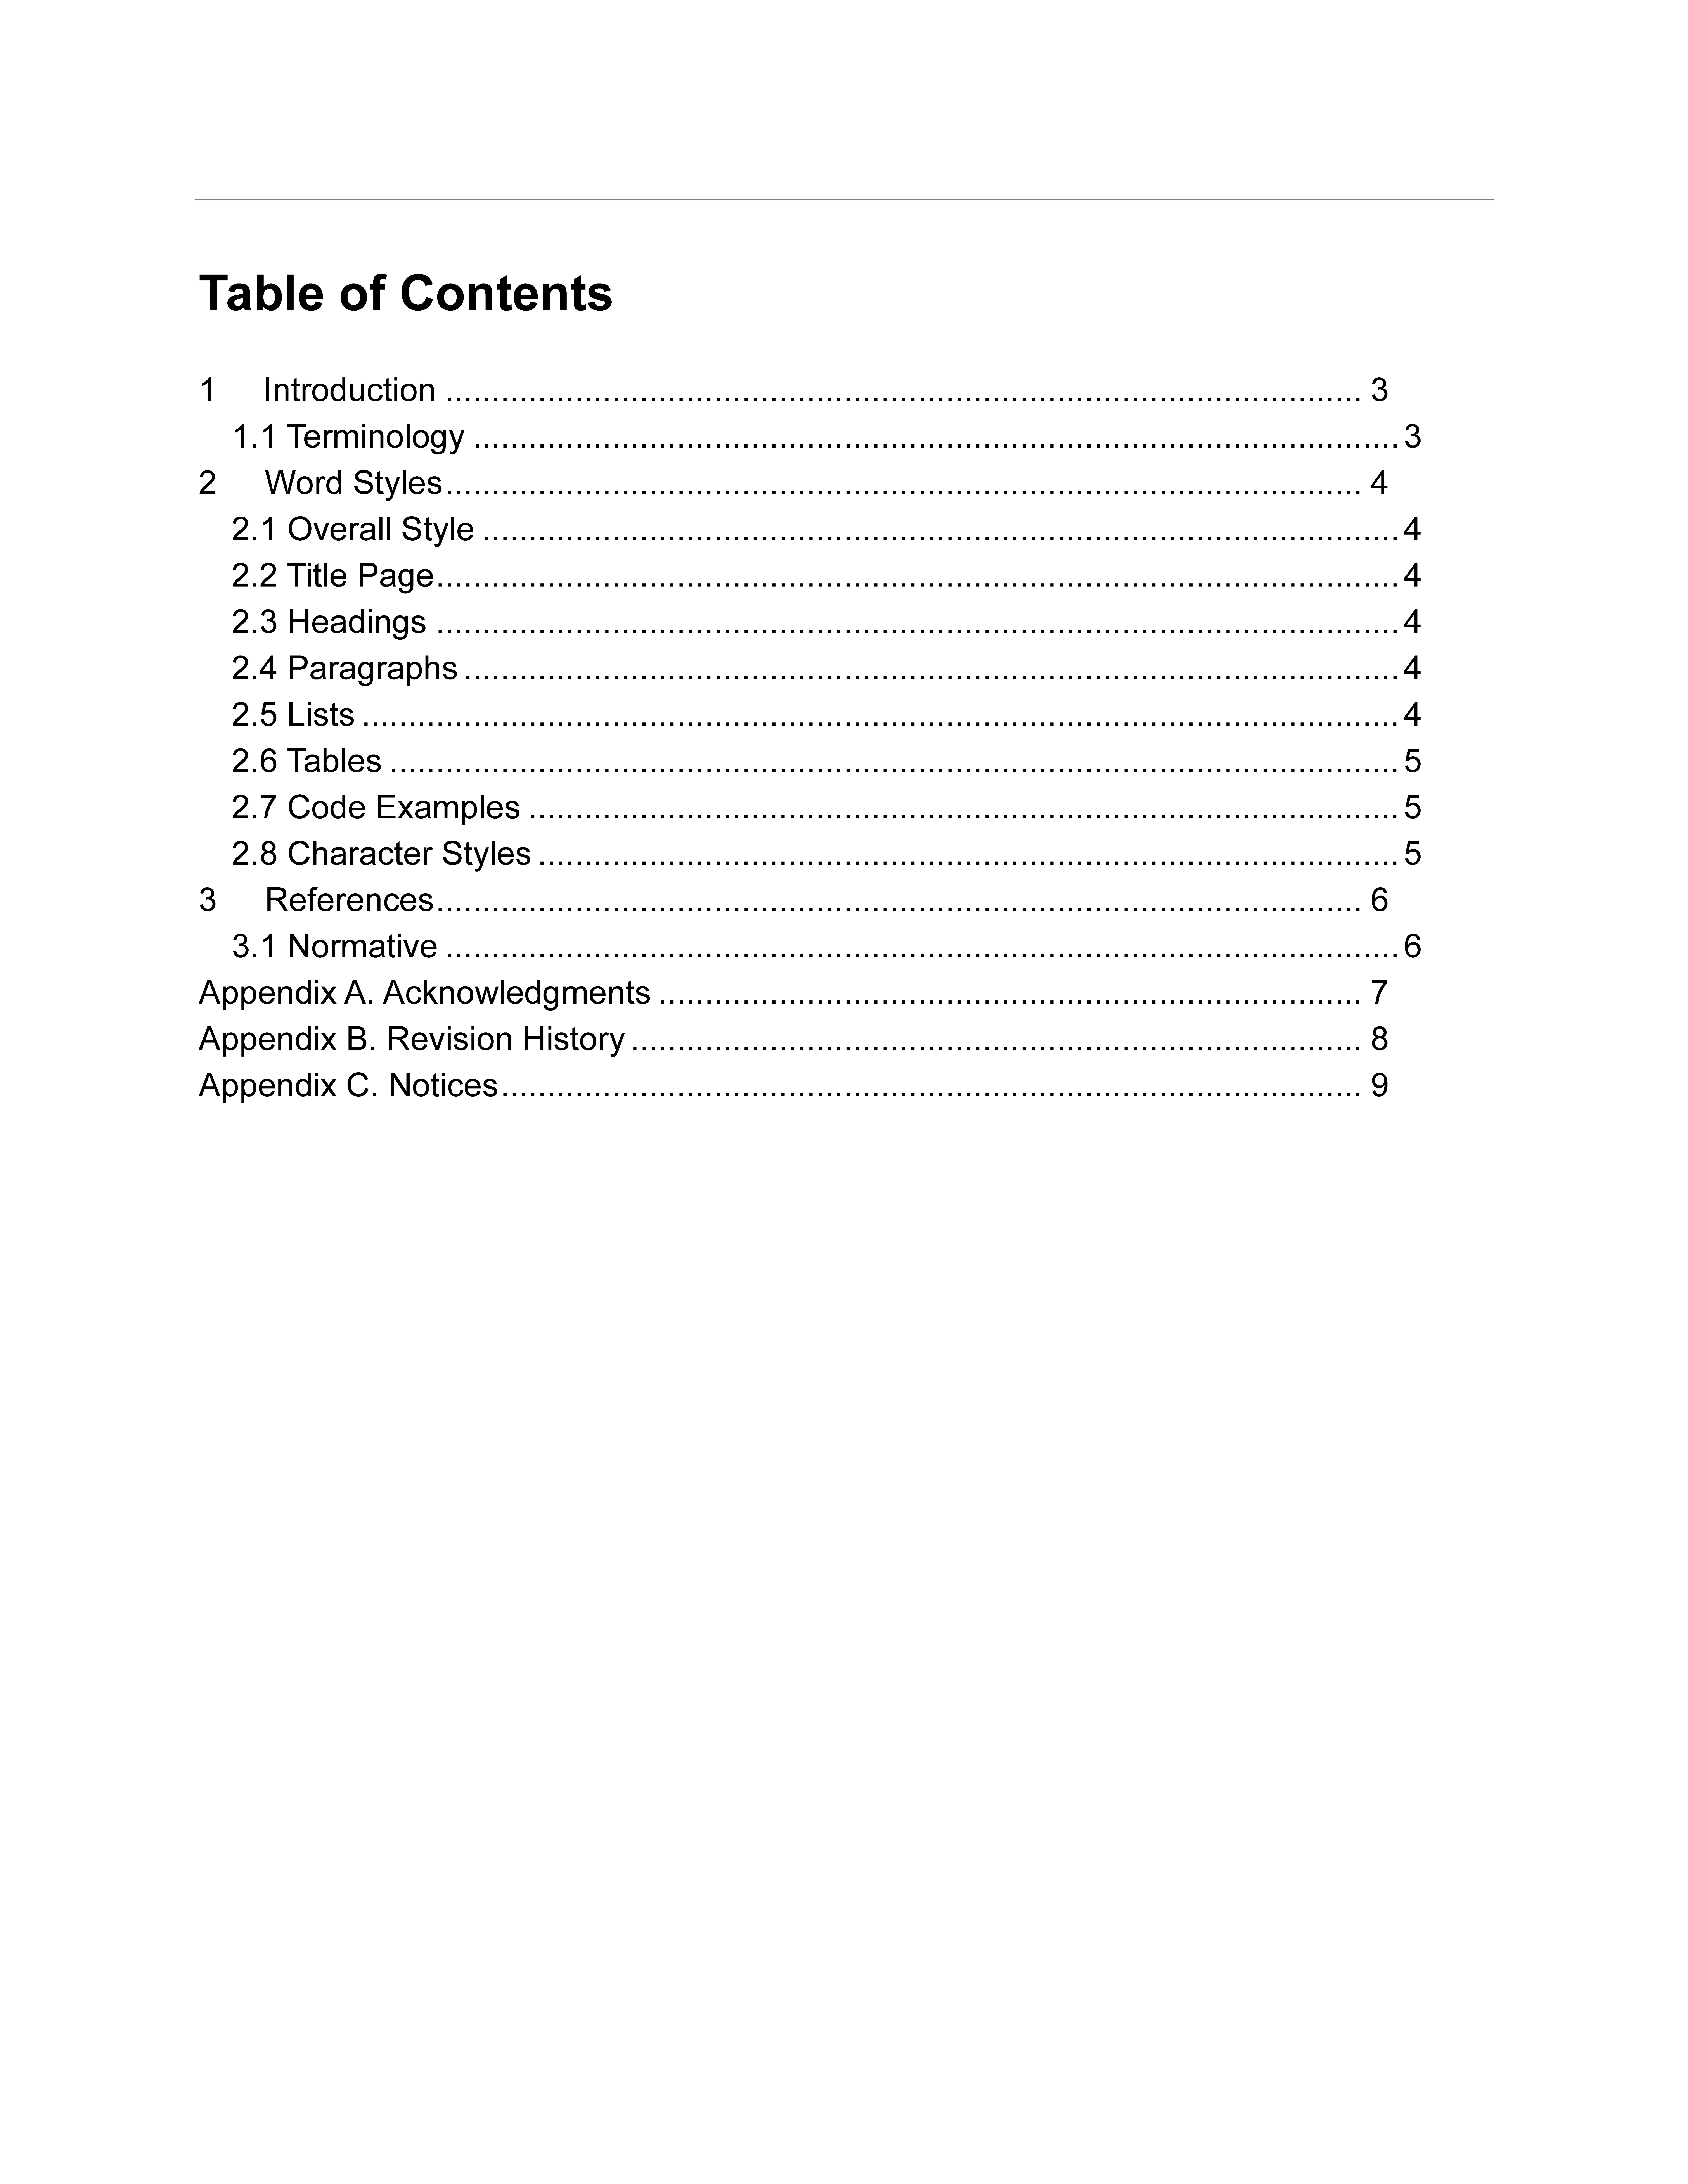 Table of Contents sample 模板